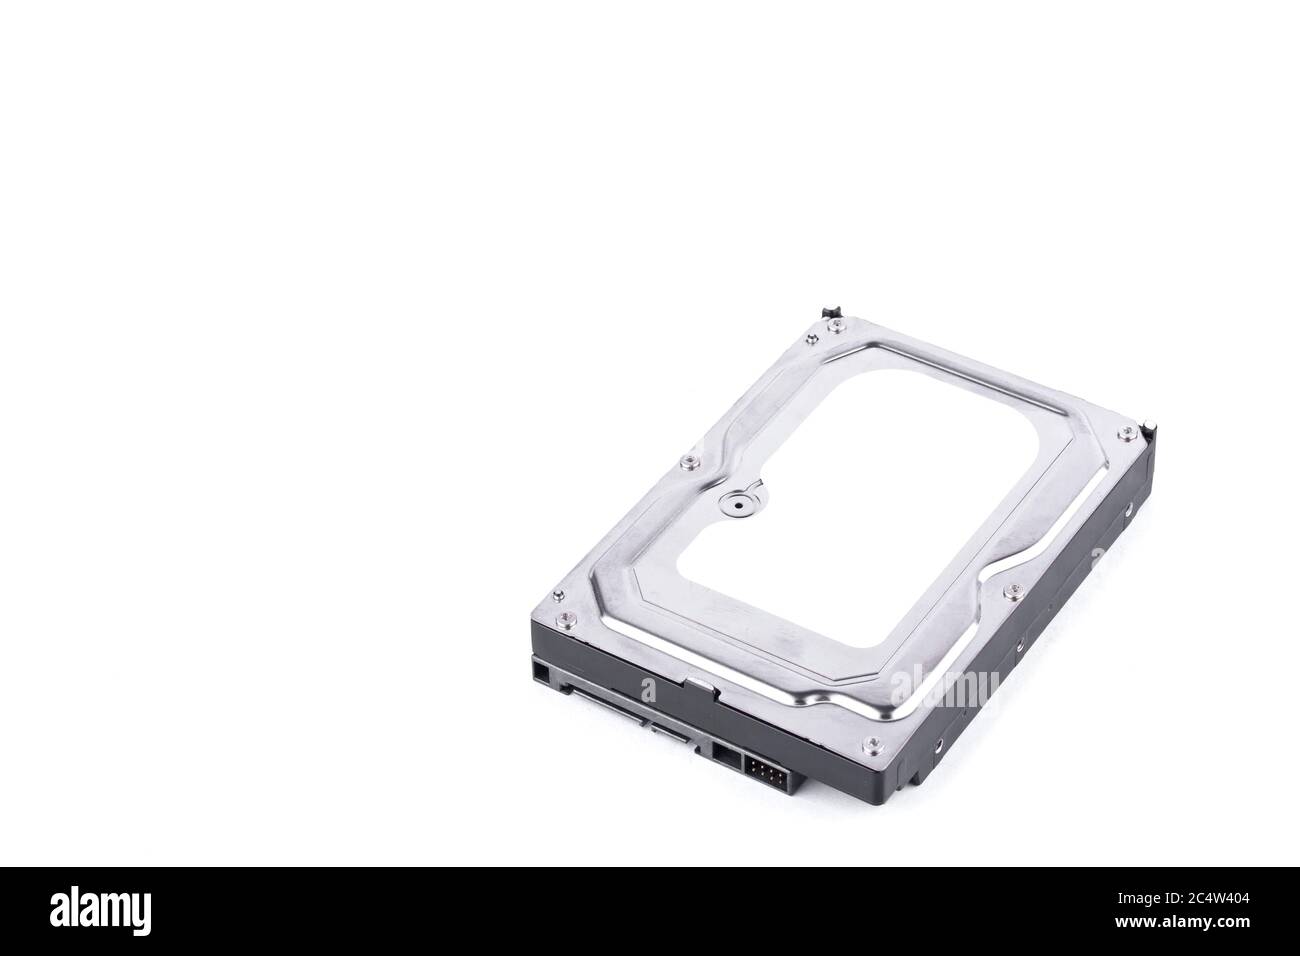 internal harddisk drive is the data storage for the digital data computer on white background  harddisk technology isolated Stock Photo